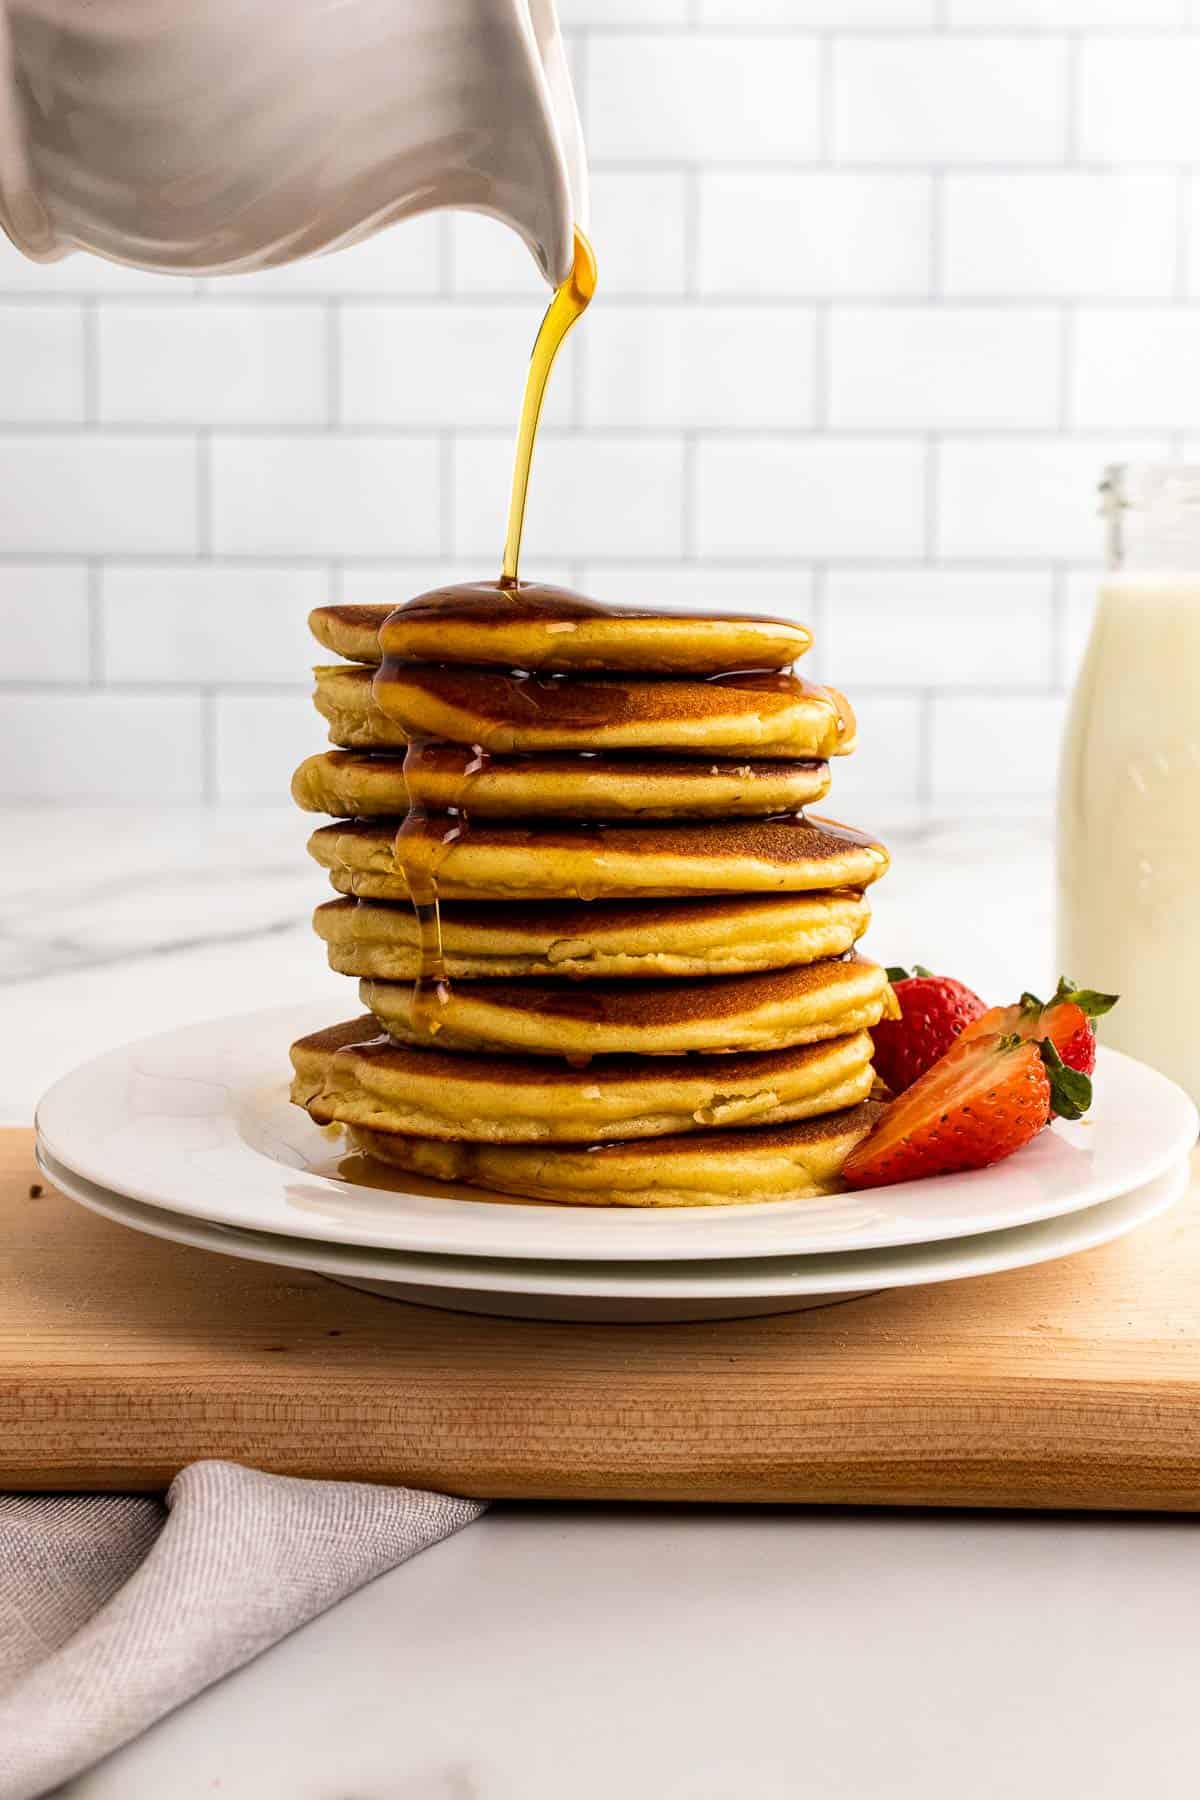 Stack of pancakes on a plate with strawberries, syrup being poured on top from a white ramekin